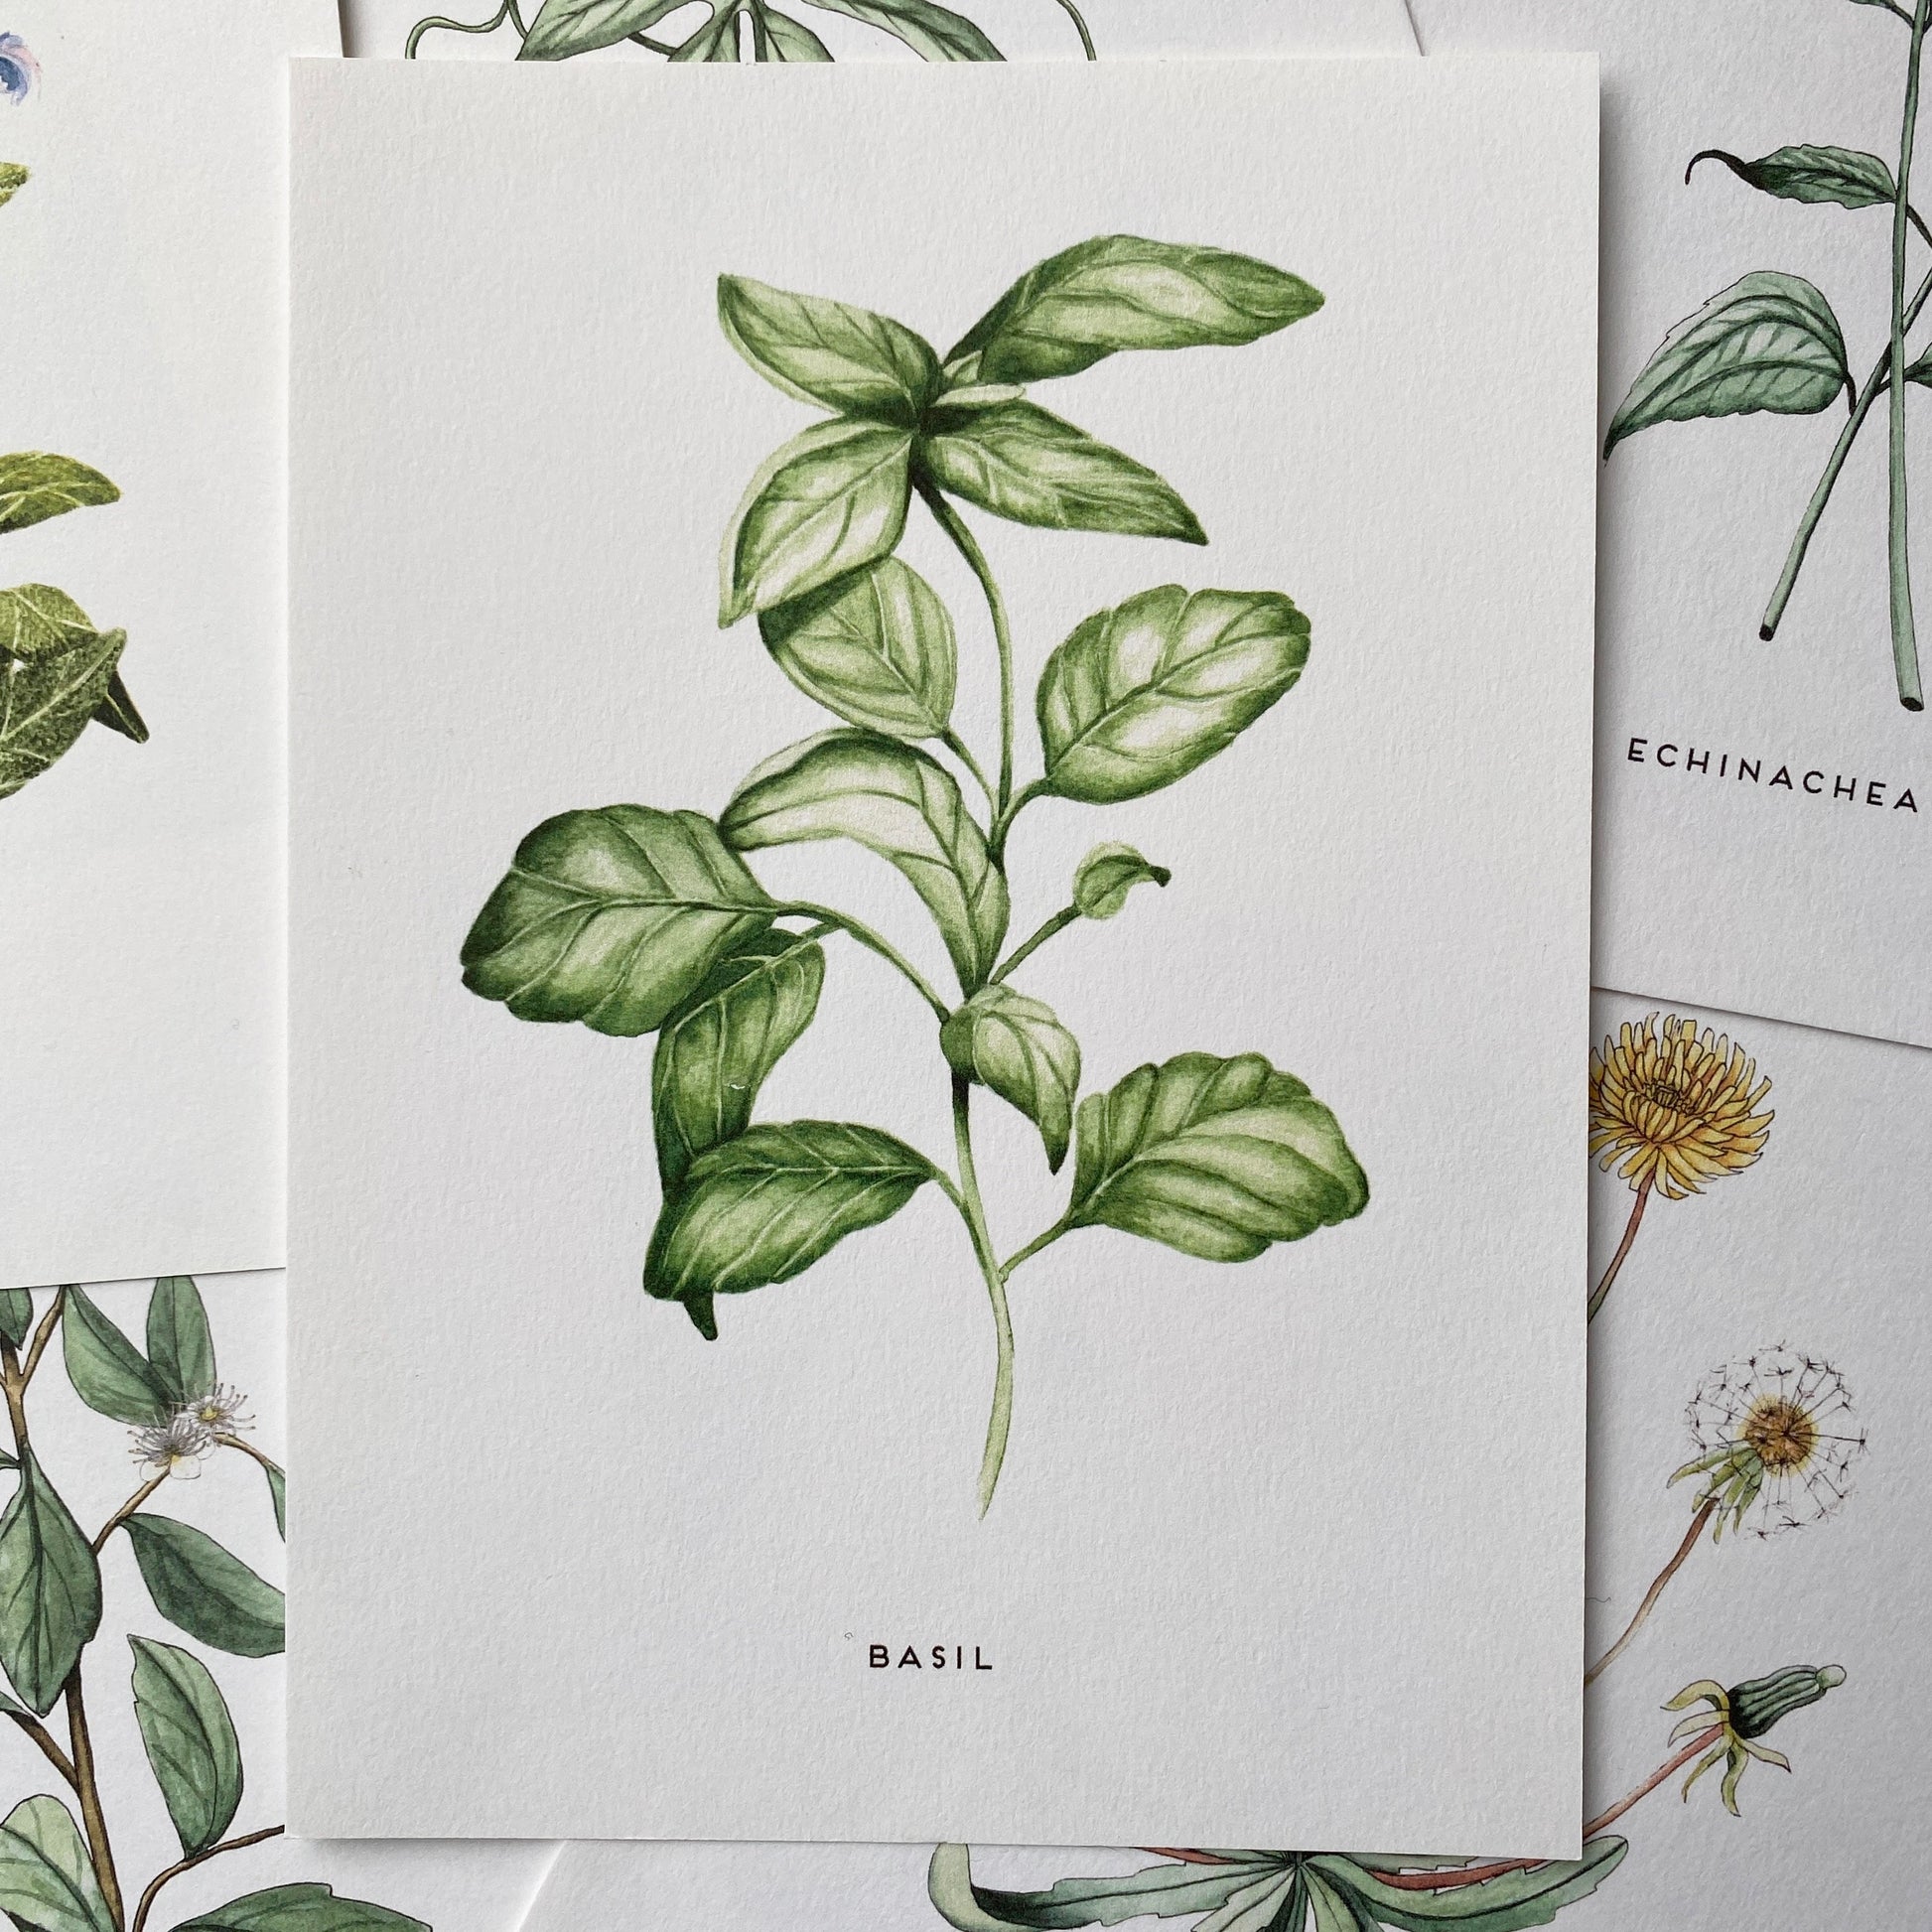 Basil leaves are soft and cloudy, a great herb, with bright green leaves, painted using watercolour